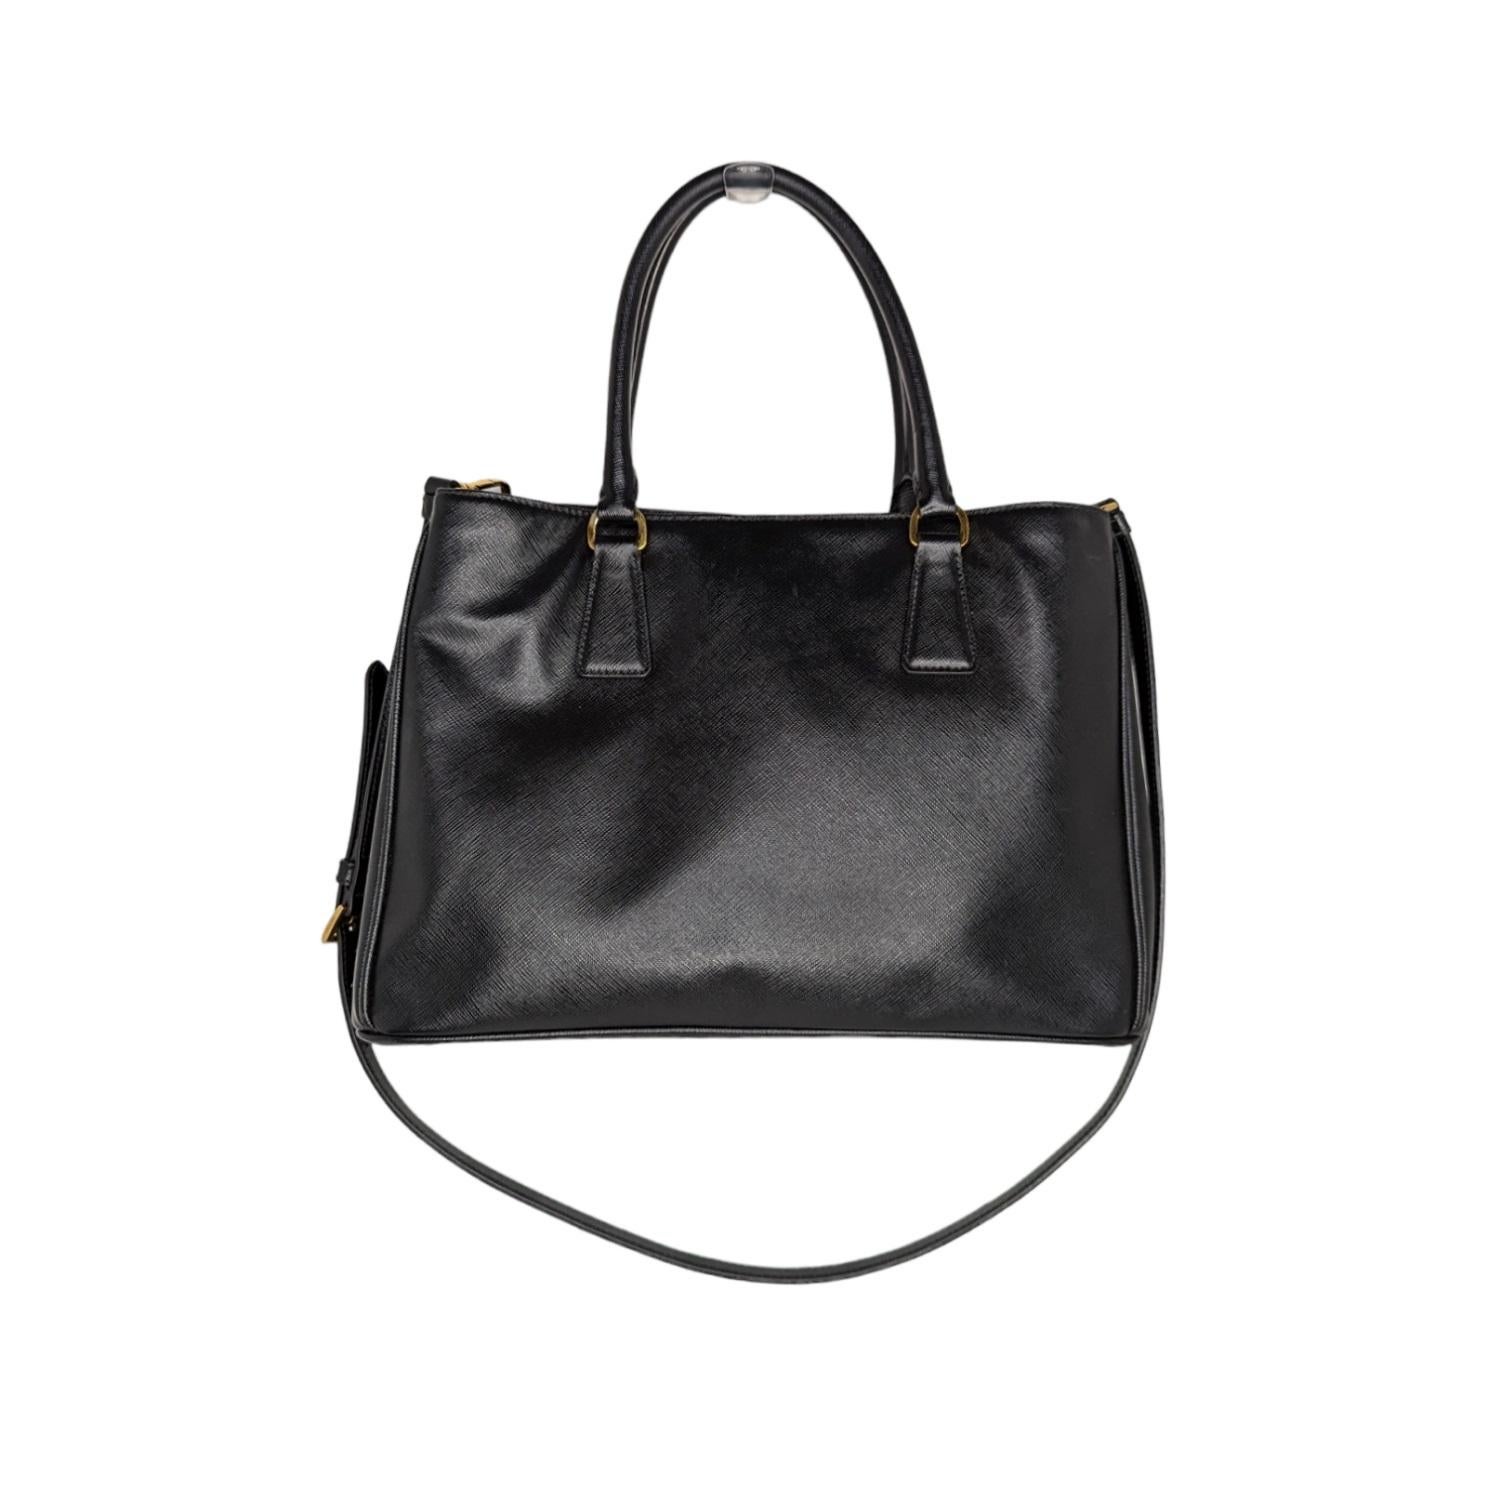 This chic tote is crafted of black saffiano cross-grain leather. The tote features rolled leather top handles, an optional shoulder strap, a hanging key clochette, and polished brass hardware including a Prada triangle logo on the front. The top is